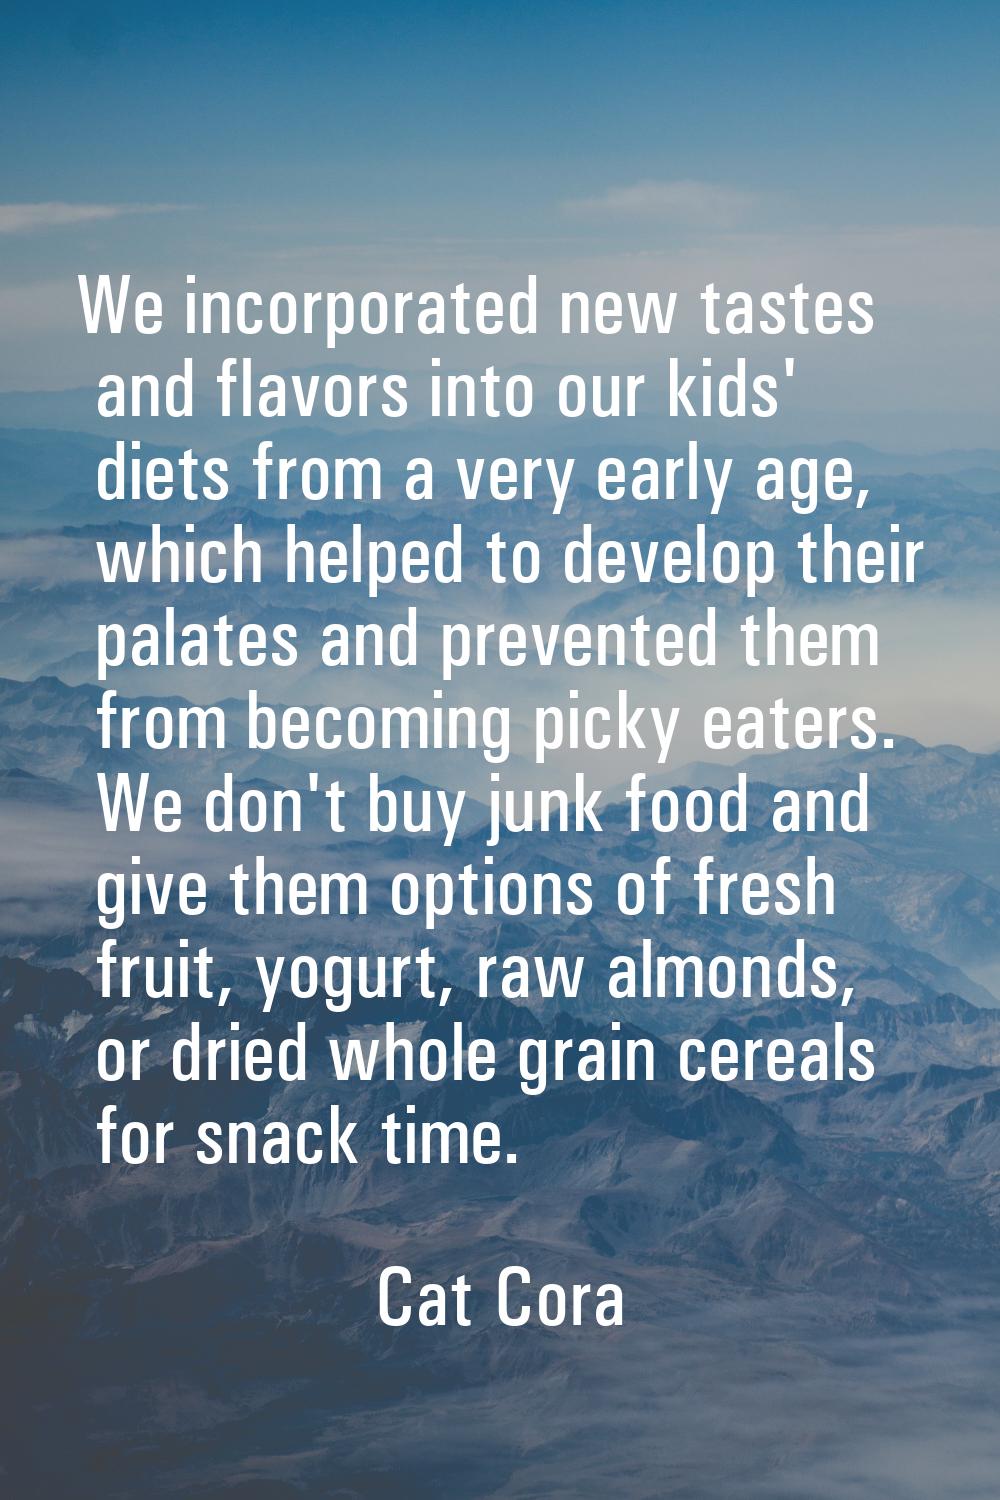 We incorporated new tastes and flavors into our kids' diets from a very early age, which helped to 